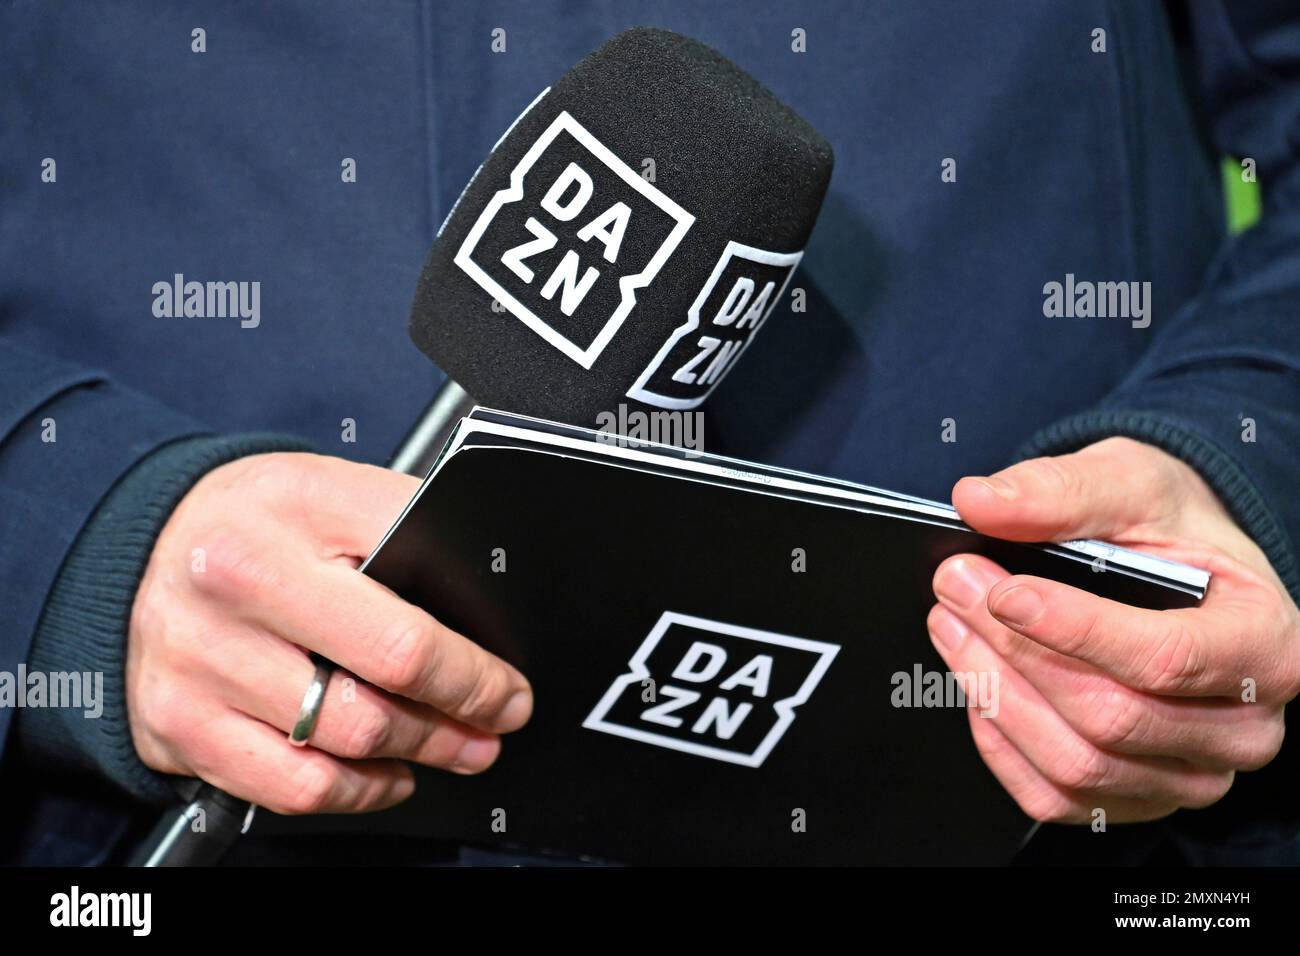 Side motive football broadcast DAZN broadcaster, streaming service, television station. Microphone, close up